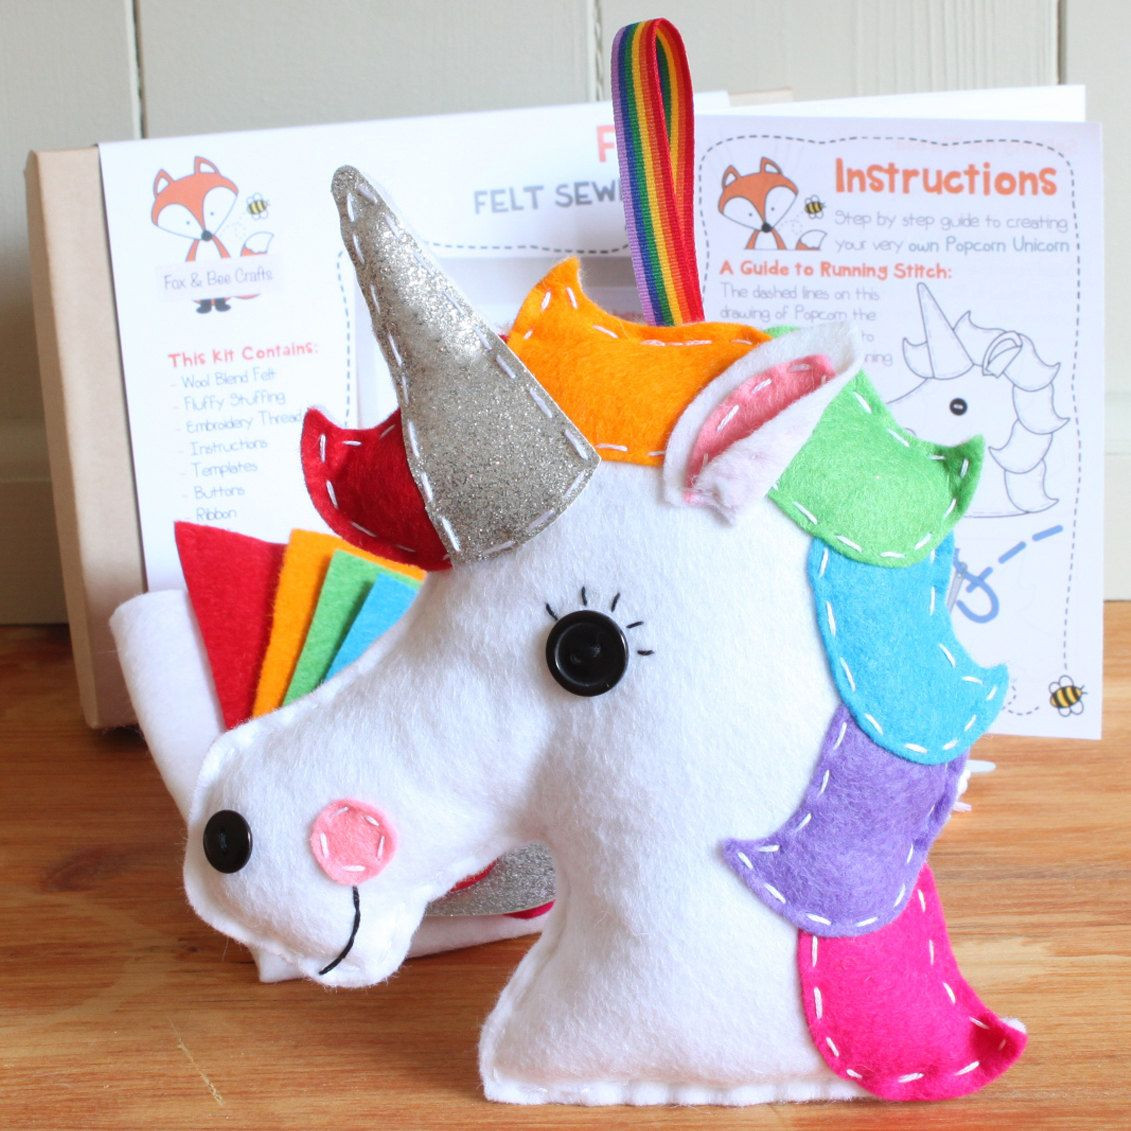 Felt Crafts For Adults
 Popcorn the Unicorn Felt Sewing Kit Perfect for kids and